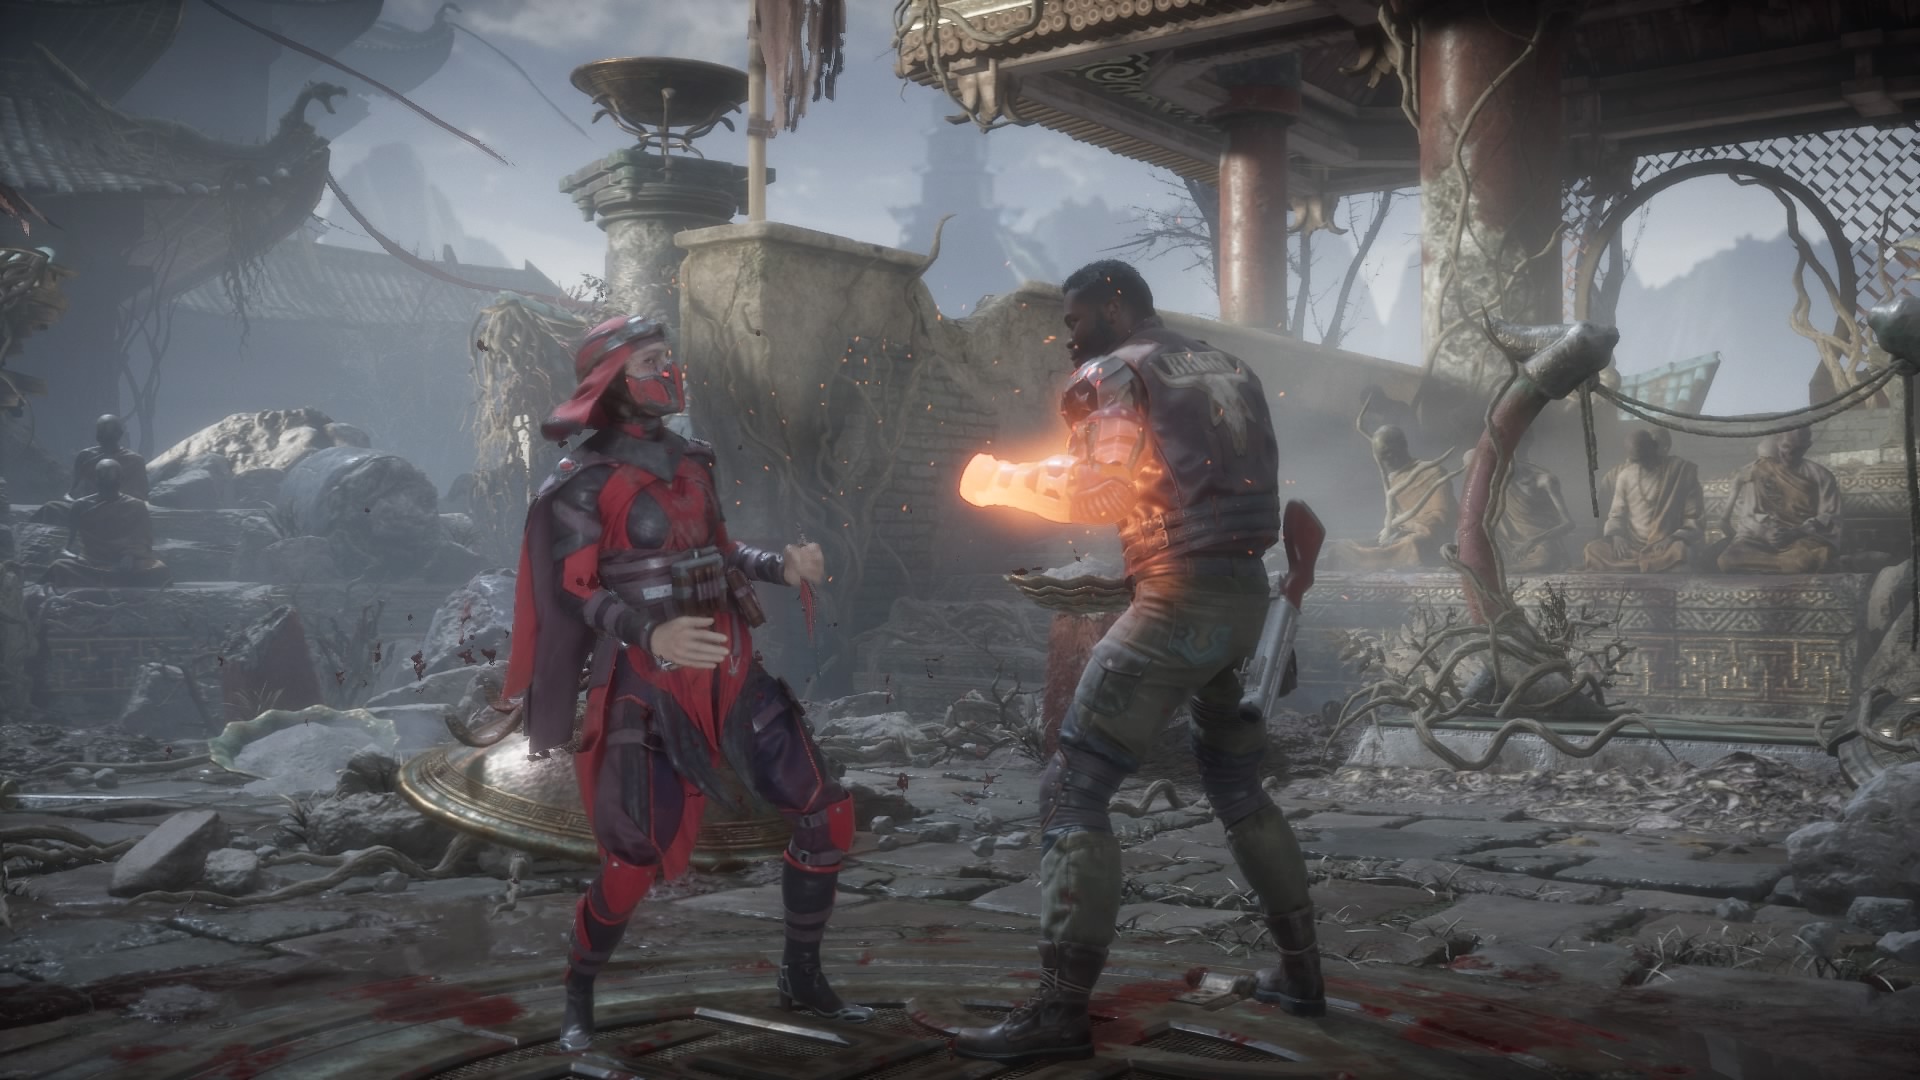 Mortal Kombat 11 review: Great gameplay, excessively packaged